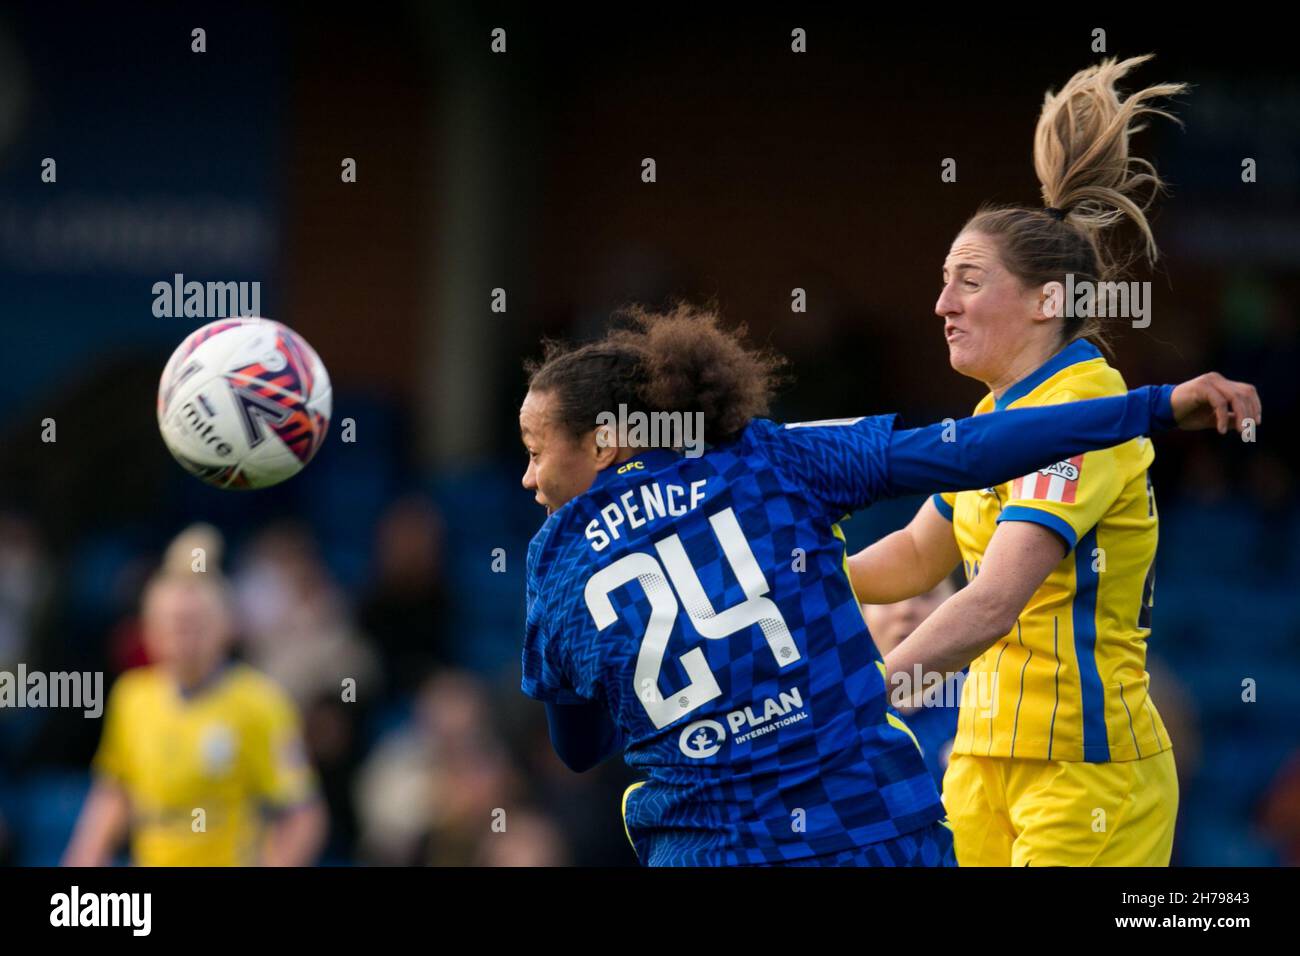 London, UK. 21st Nov, 2021. LONDON, UK. NOVEMBER 21ST : Drew Spence of Chelsea FC heads the ball during the 2021-22 FA Womens Superleague fixture between Chelsea FC and Birmingham City at Kingsmeadow. Credit: Federico Guerra Morán/Alamy Live News Stock Photo